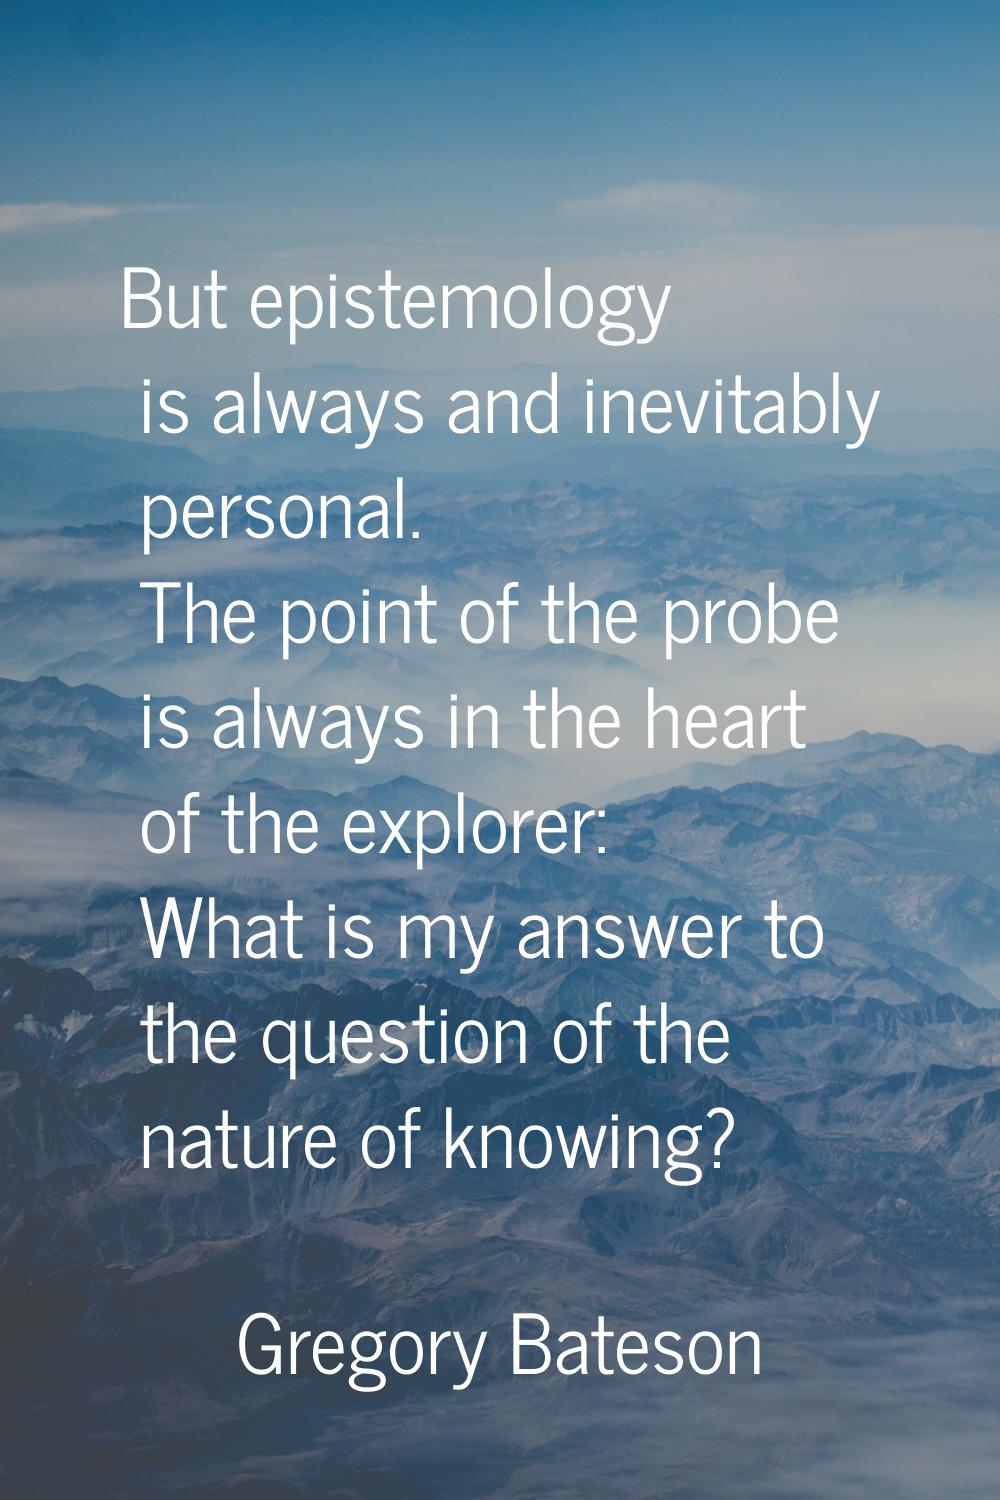 But epistemology is always and inevitably personal. The point of the probe is always in the heart o